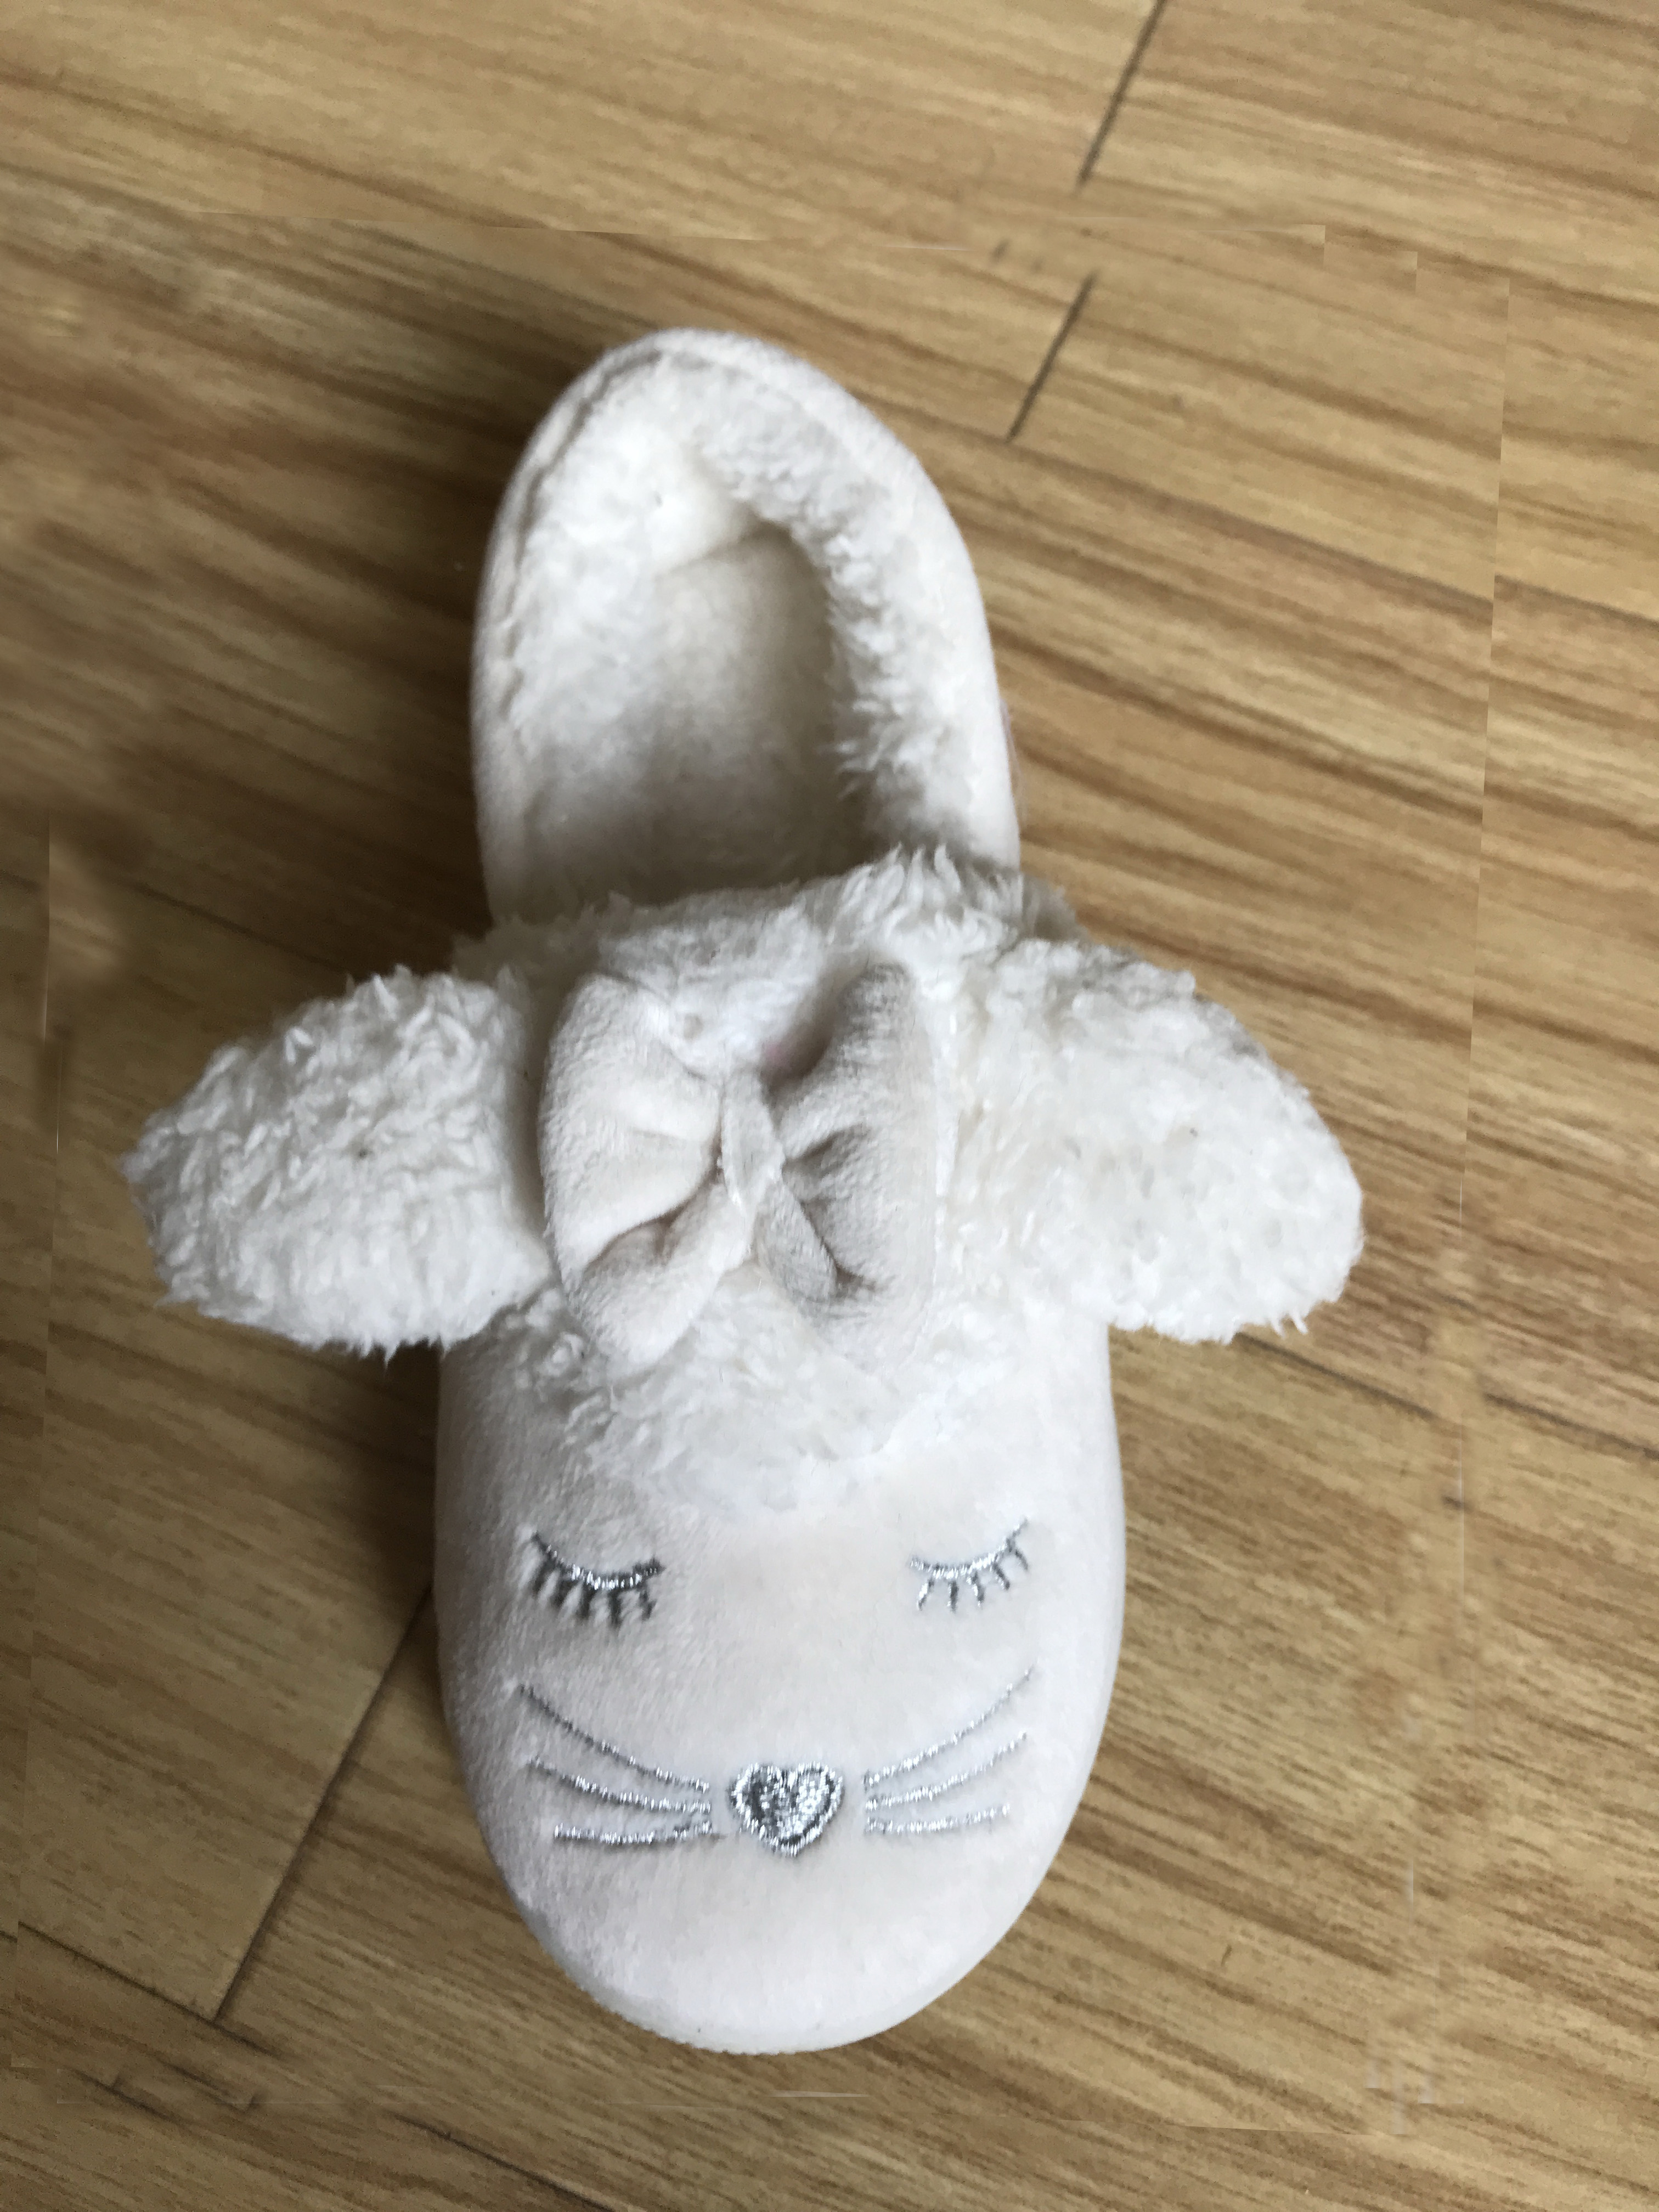 Kids Bunny Slippers Fuzzy Cute Animal Slippers for Girls Boys Indoor House Non-Slip Indoor Warm Fluffy Slippers 